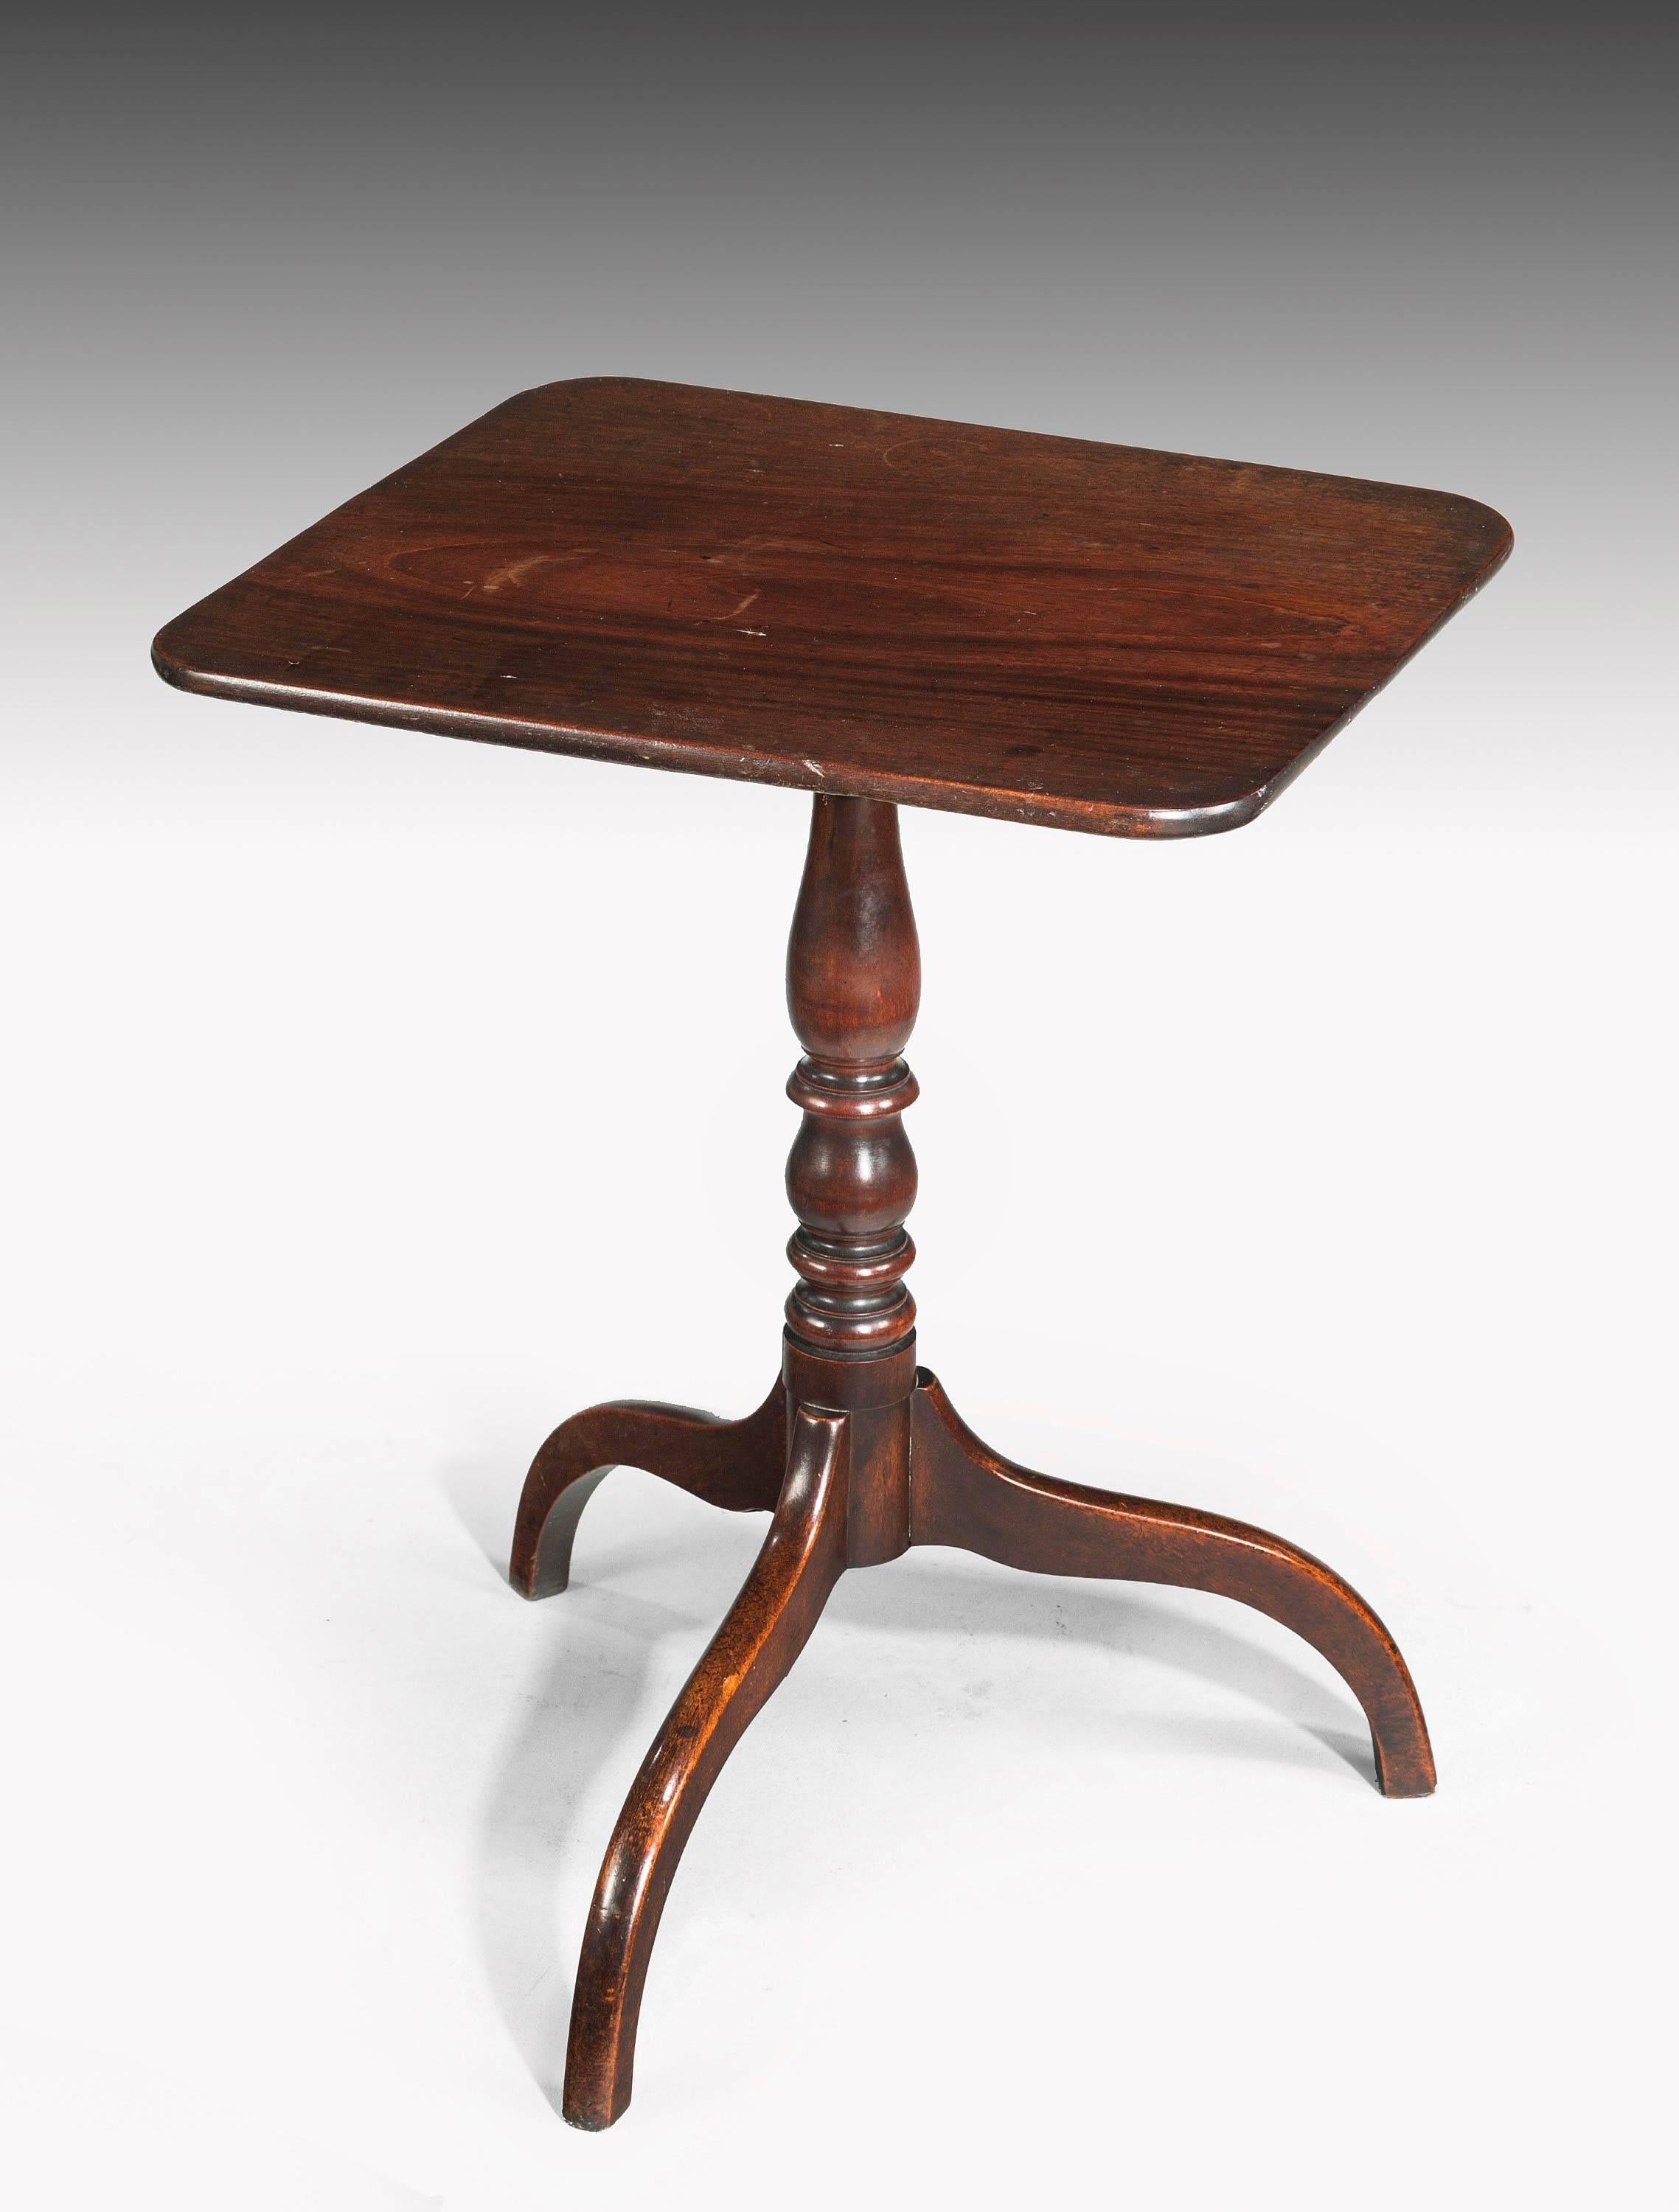 George III period mahogany tilt table on a well turned centre support over three umbrella legs. Well patinated with original surfaces.